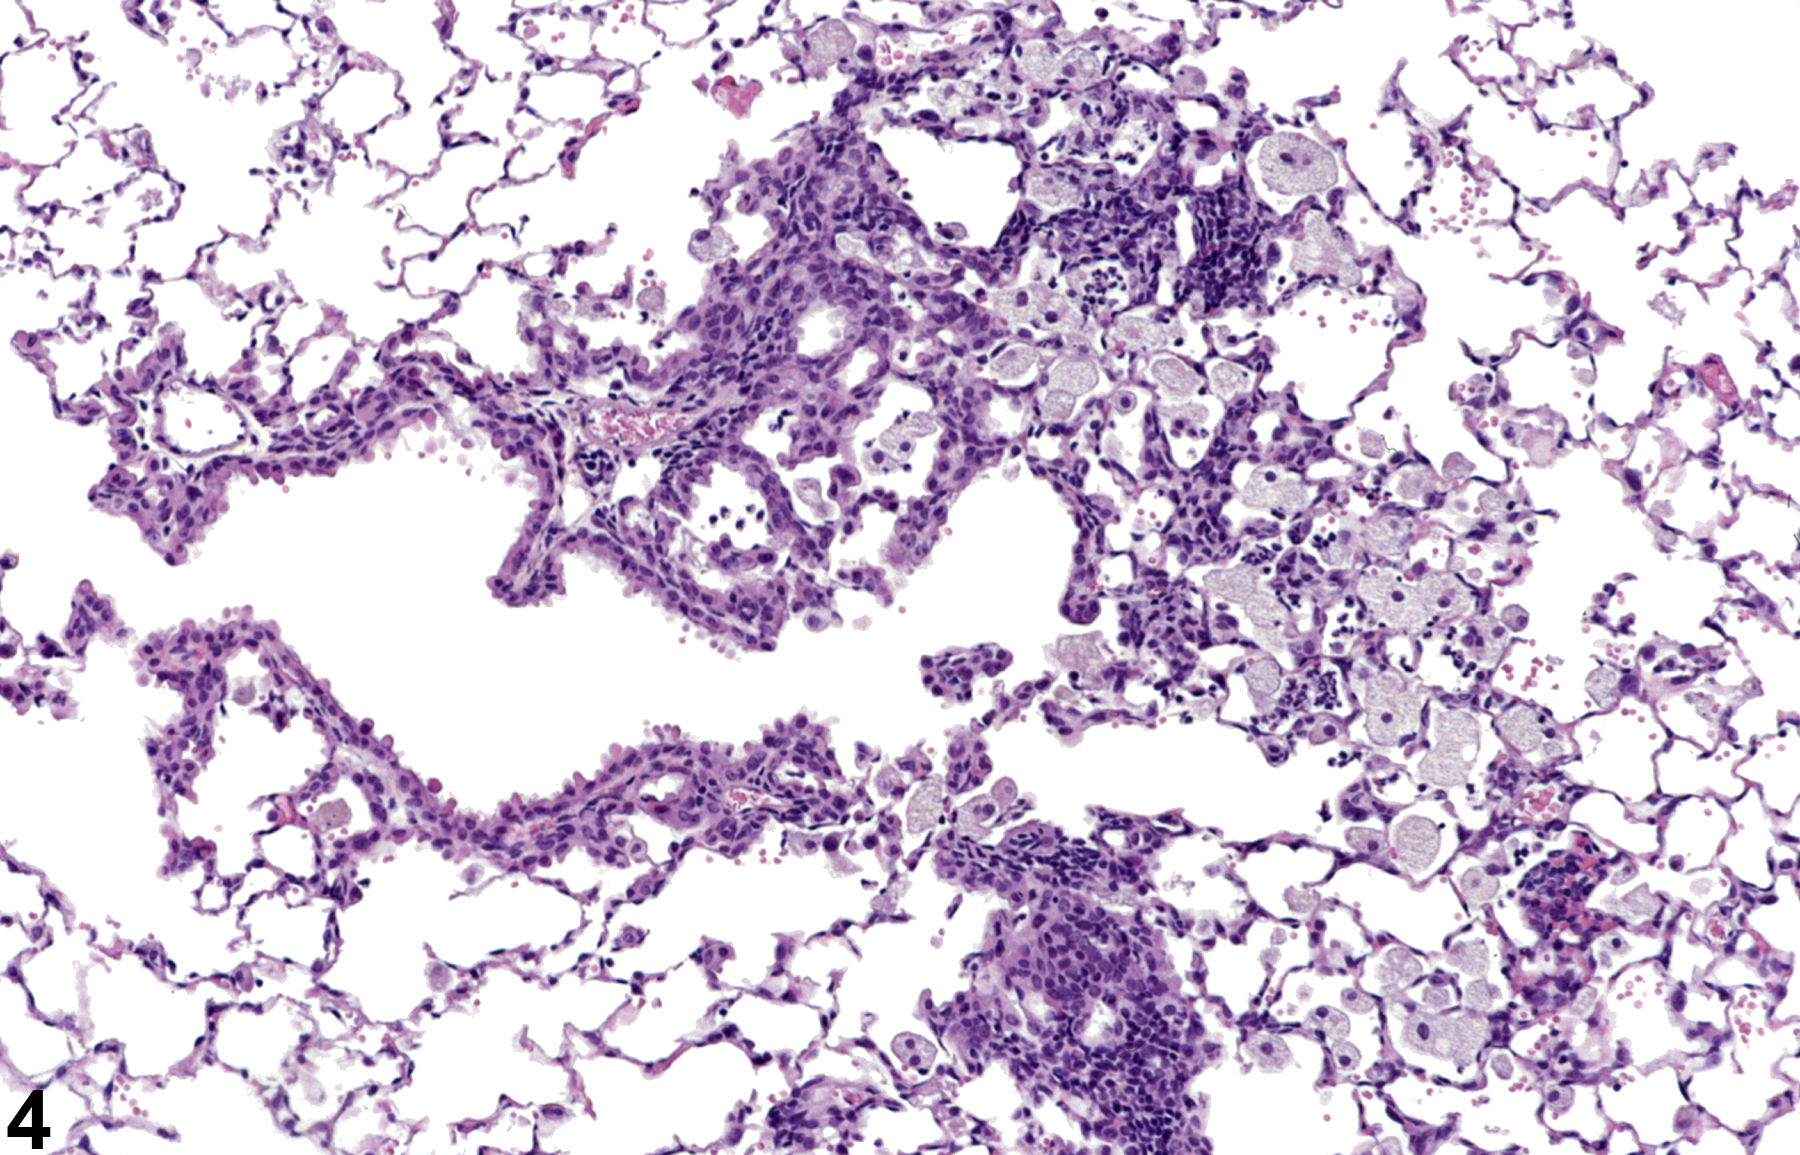 Image of alveolar/bronchiolar epithelial hyperplasia in the lung from a male B6C3F1/N mouse in a chronic study